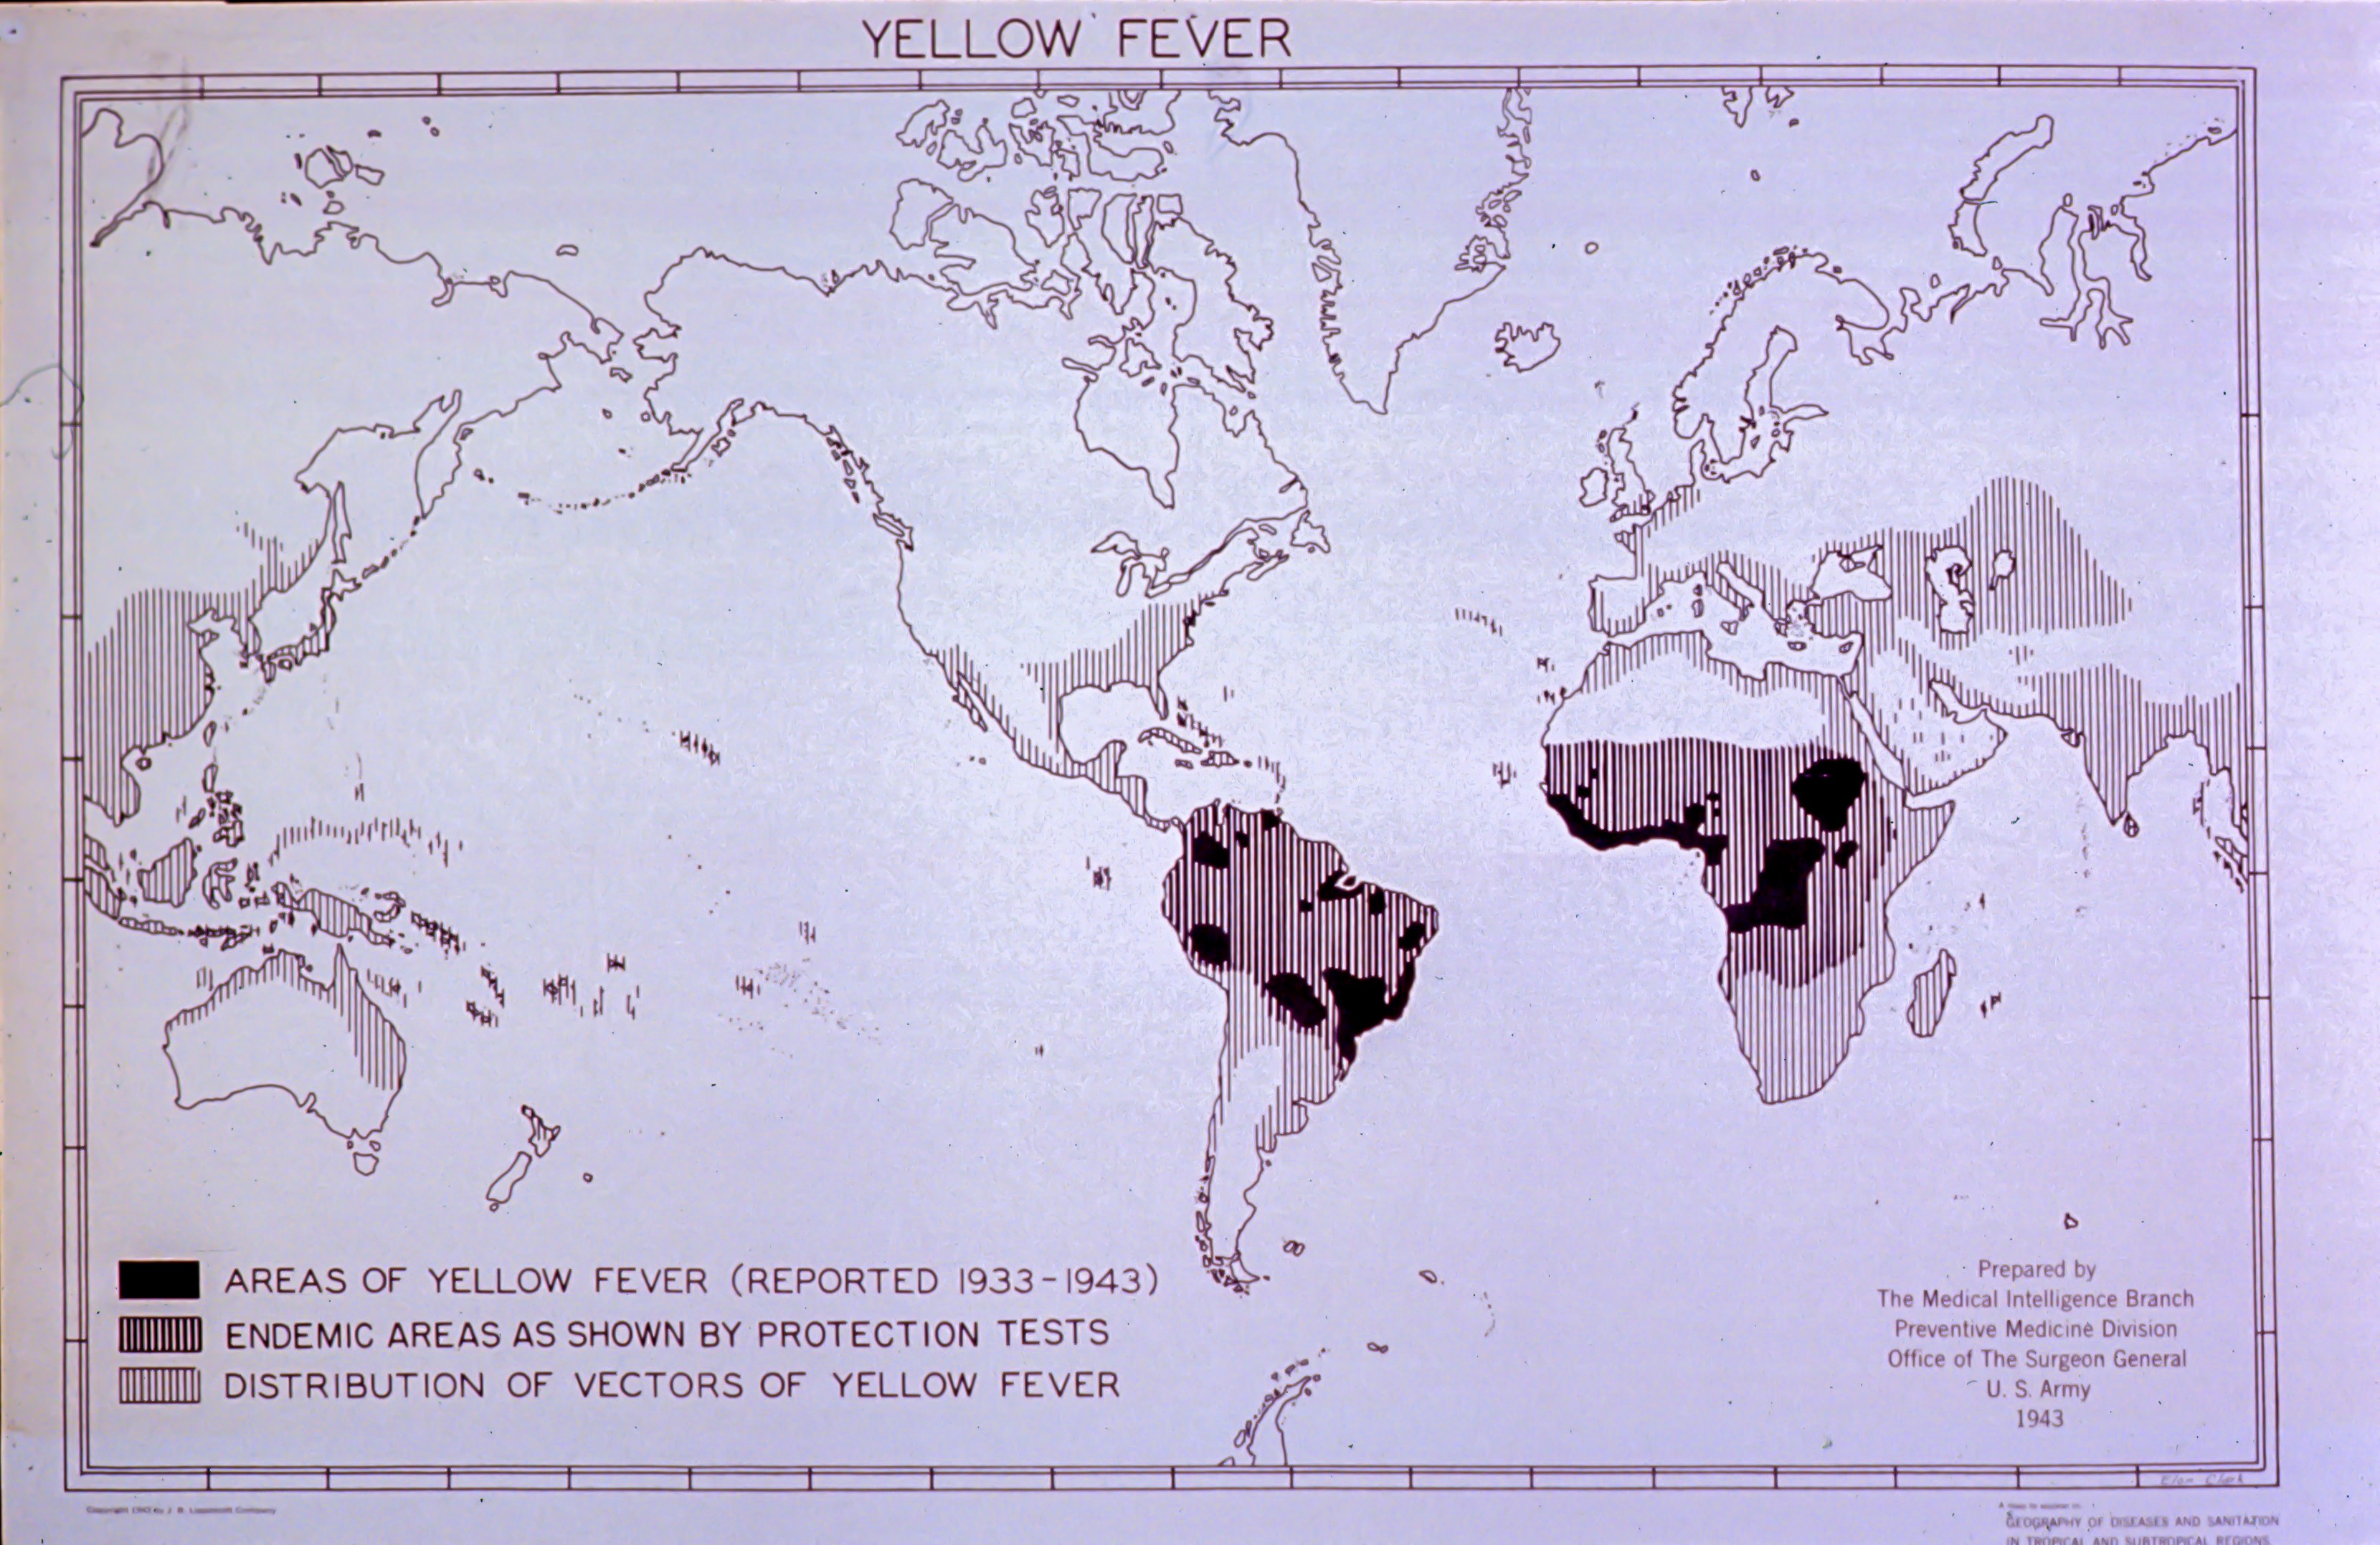 Old map showing areas of yellow fever from 1933-1943, endemic areas as shown by protection tests, and distribution of vectors of yellow fever